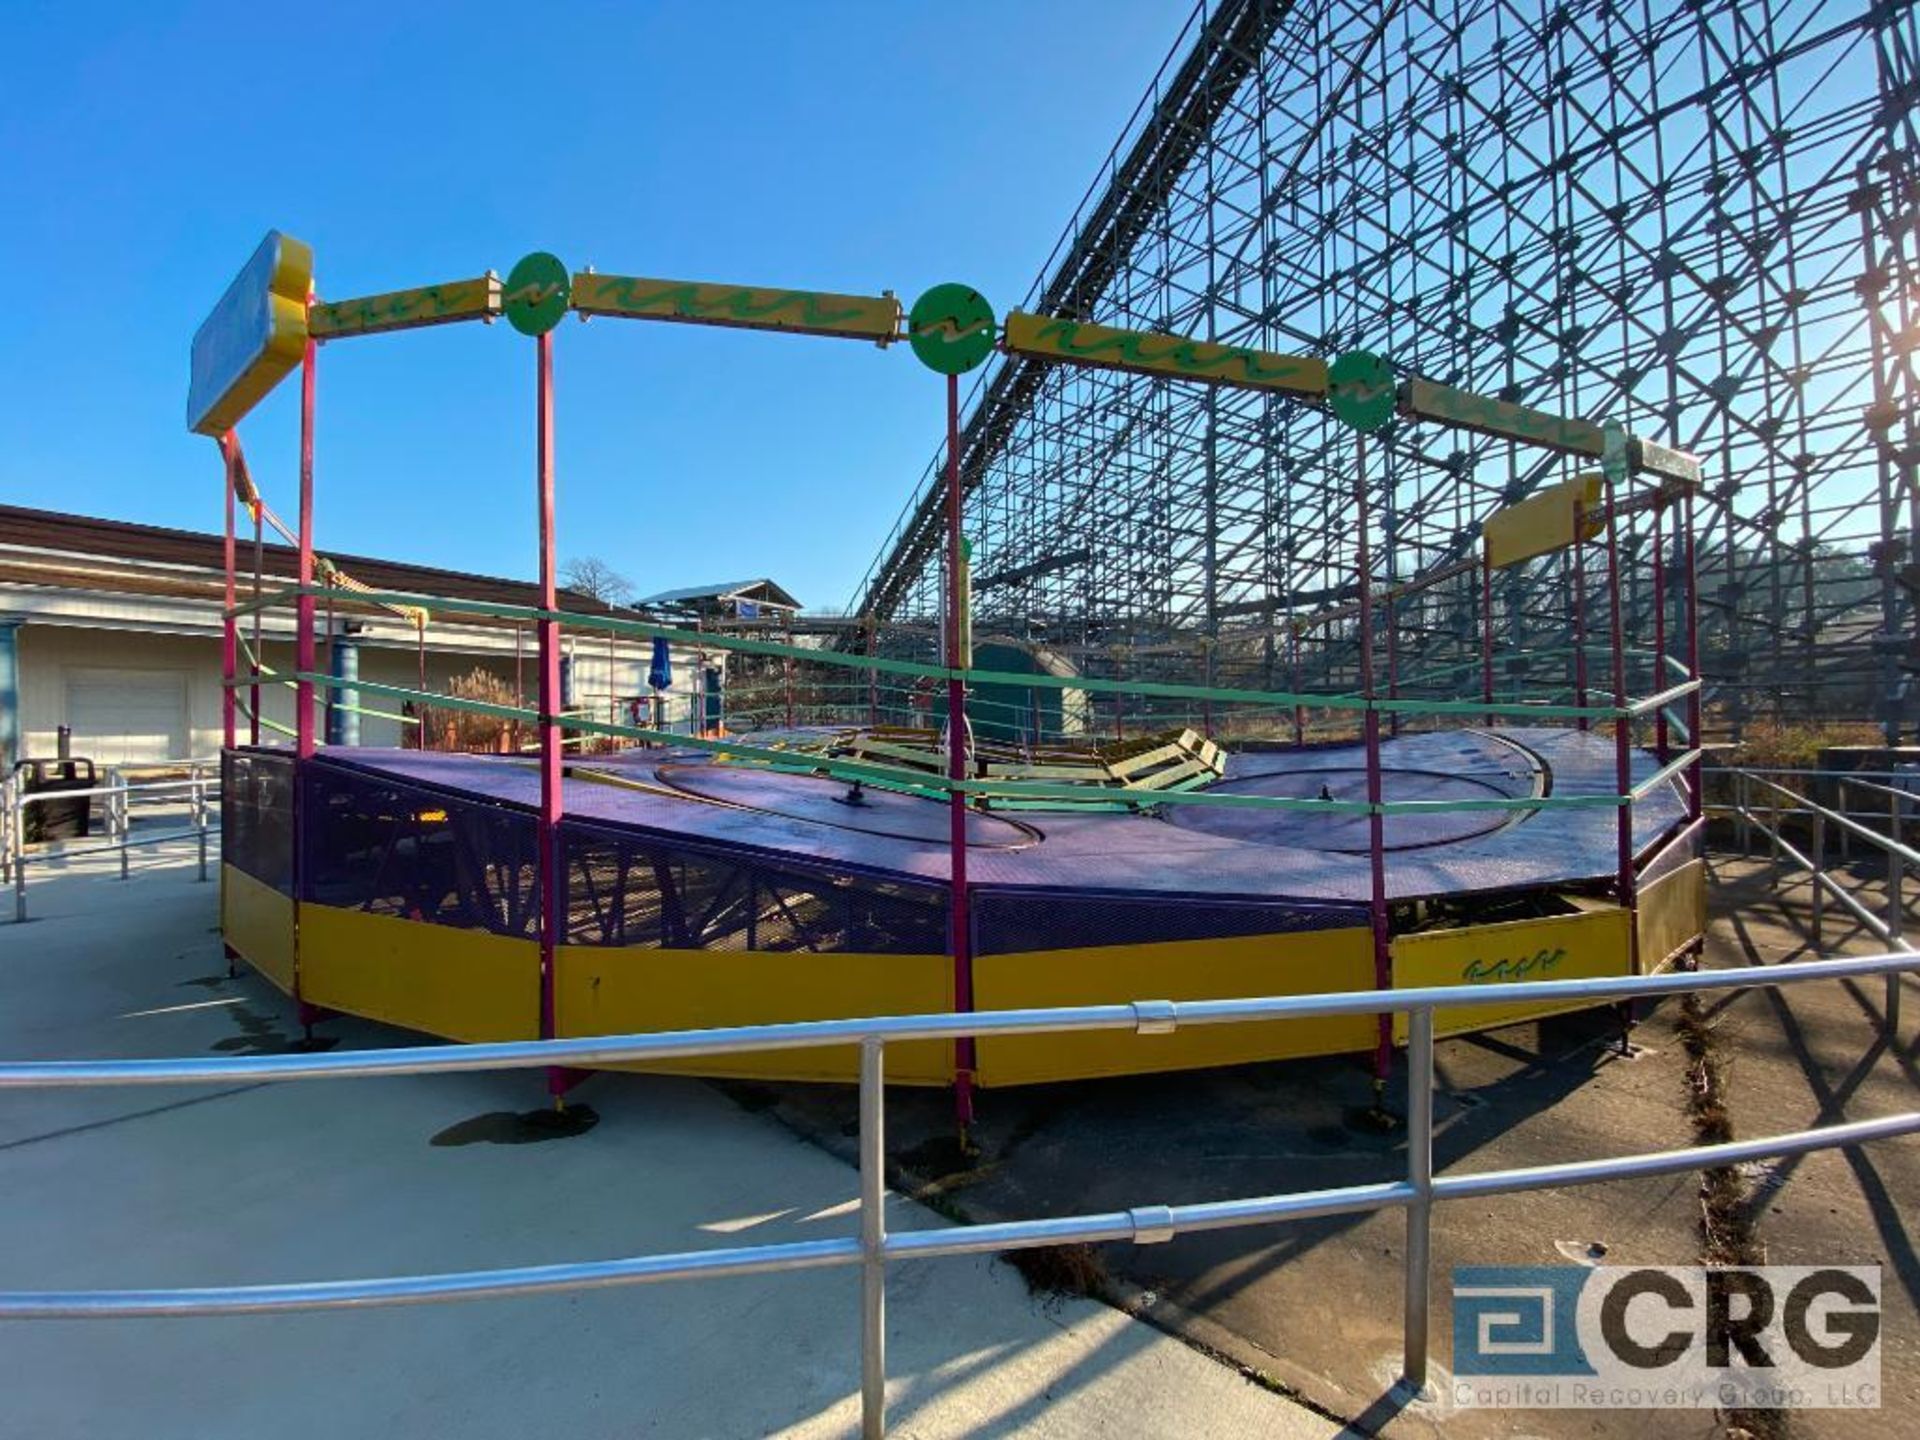 Tilt A Whirl circular ride (Passenger cars, seats, and baskets in storage on the premises,